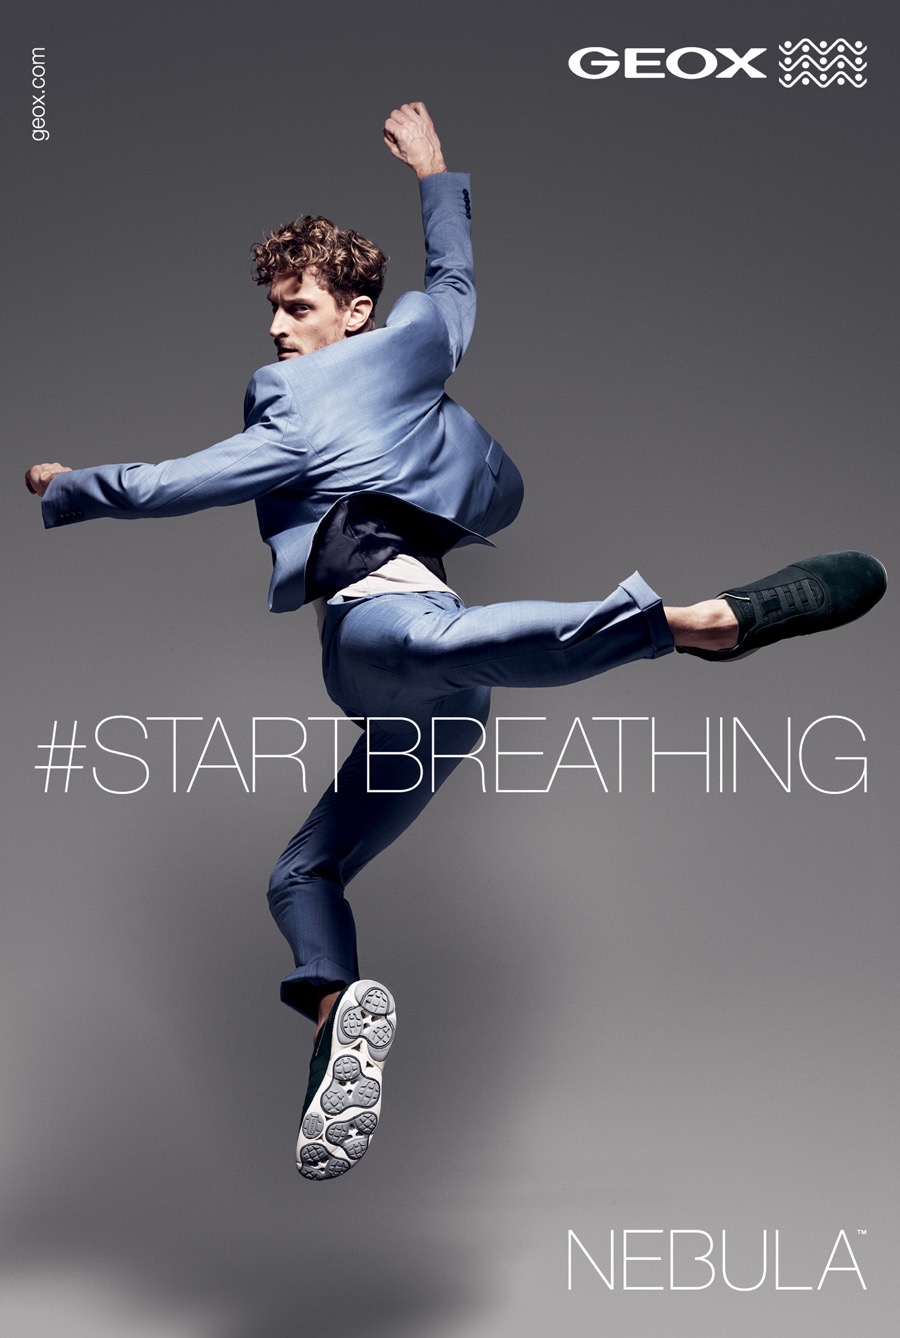 Rankin Captures Geox's Dance Themed Campaign